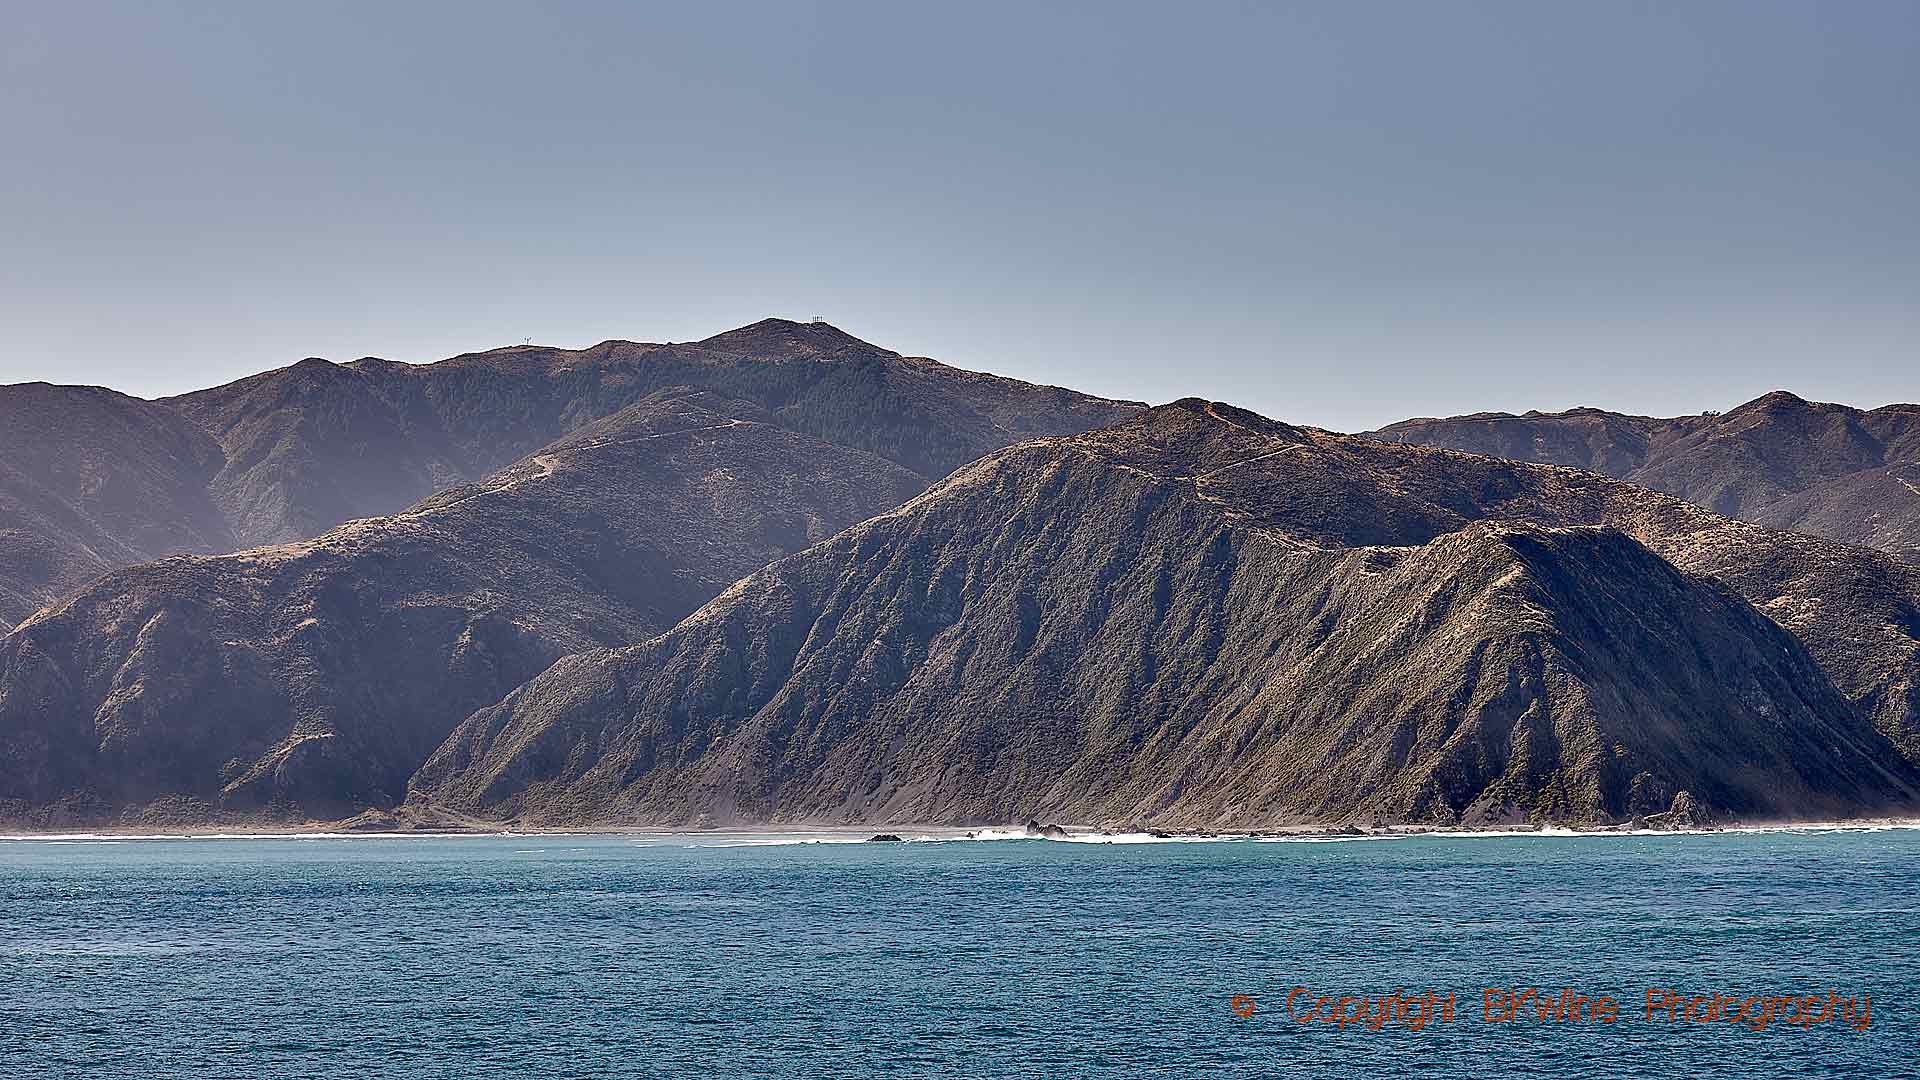 Approaching Picton on the Cook Strait